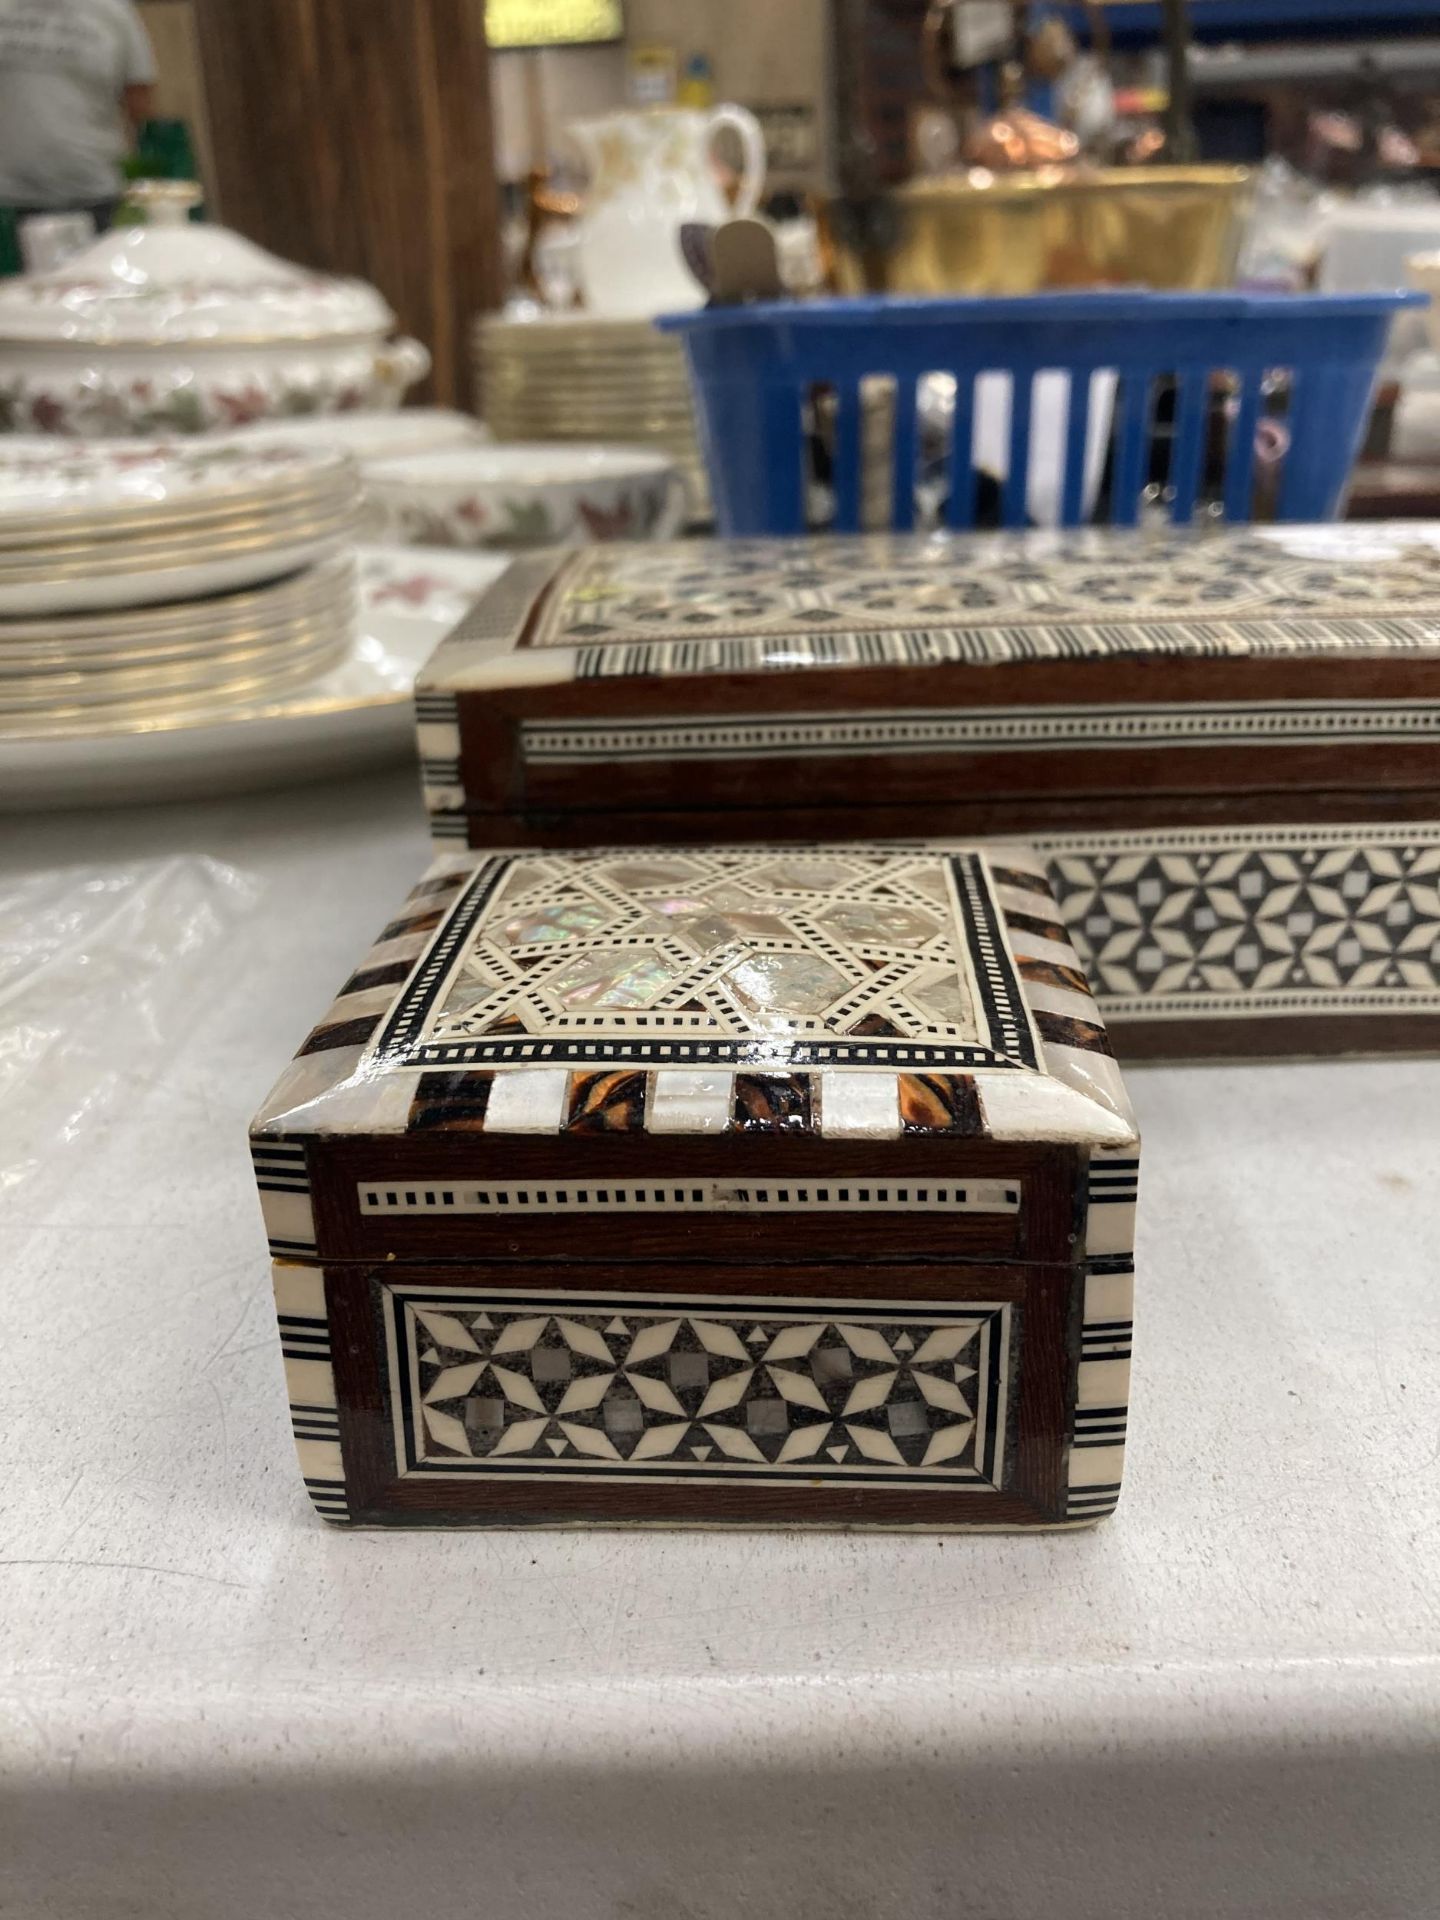 TWO VINTAGE INLAID MIDDLE EASTERN JEWELLERY BOXES - Image 2 of 3